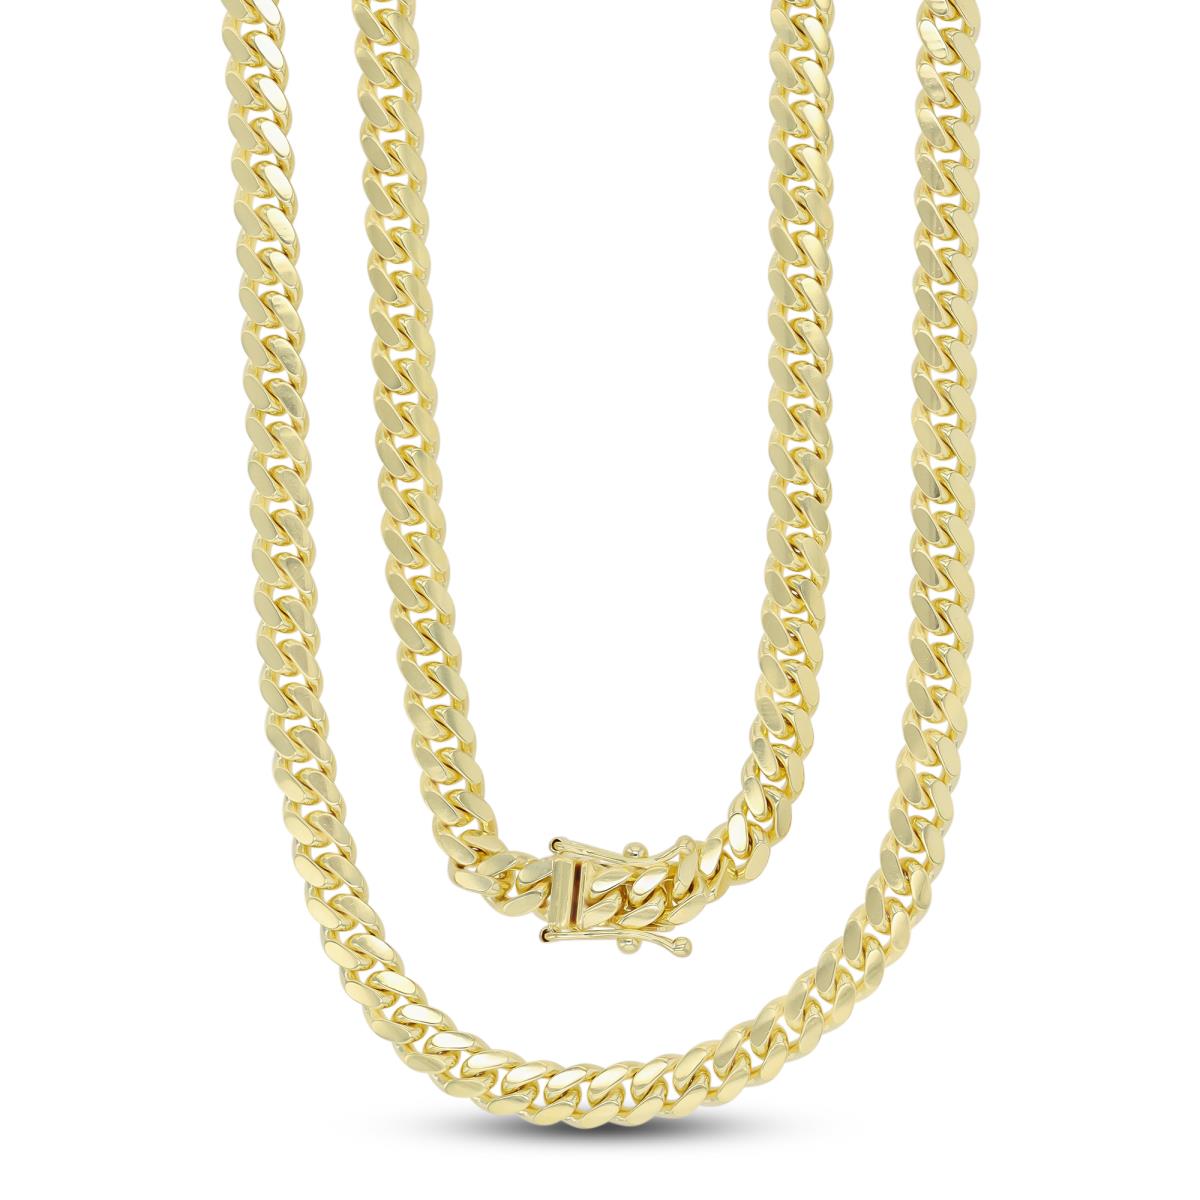 14K Yellow Gold 5mm Solid Miami Cuban 150 20" Chain With Box Lock